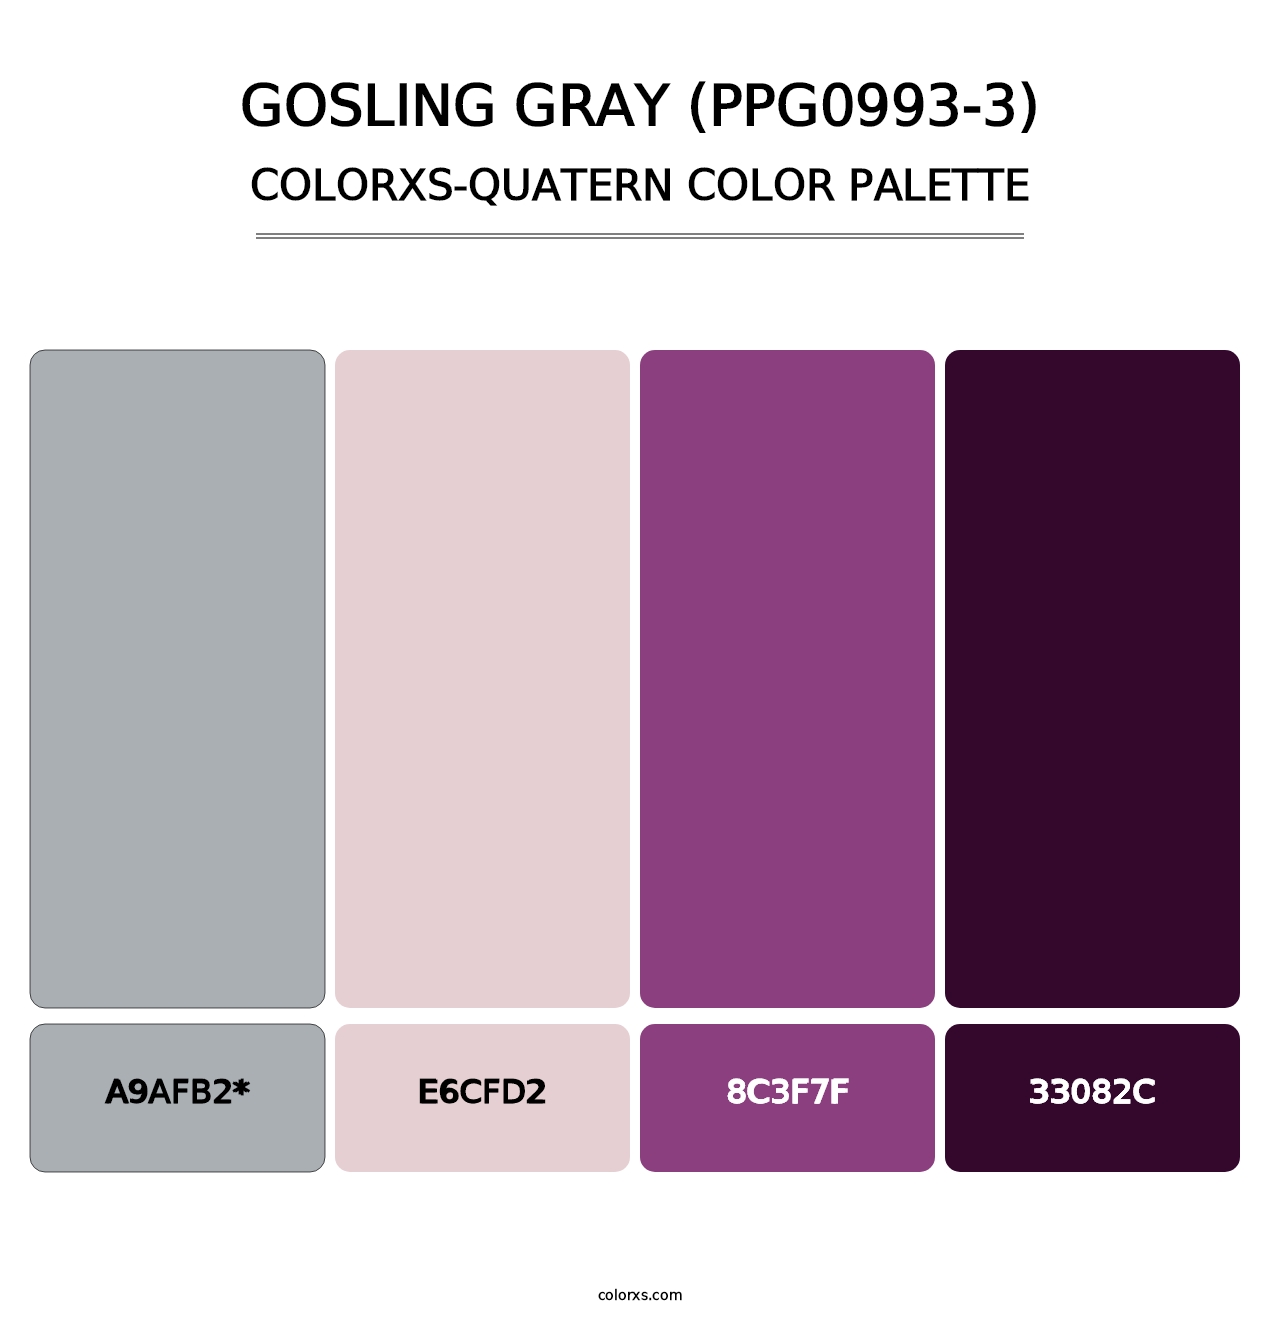 Gosling Gray (PPG0993-3) - Colorxs Quatern Palette